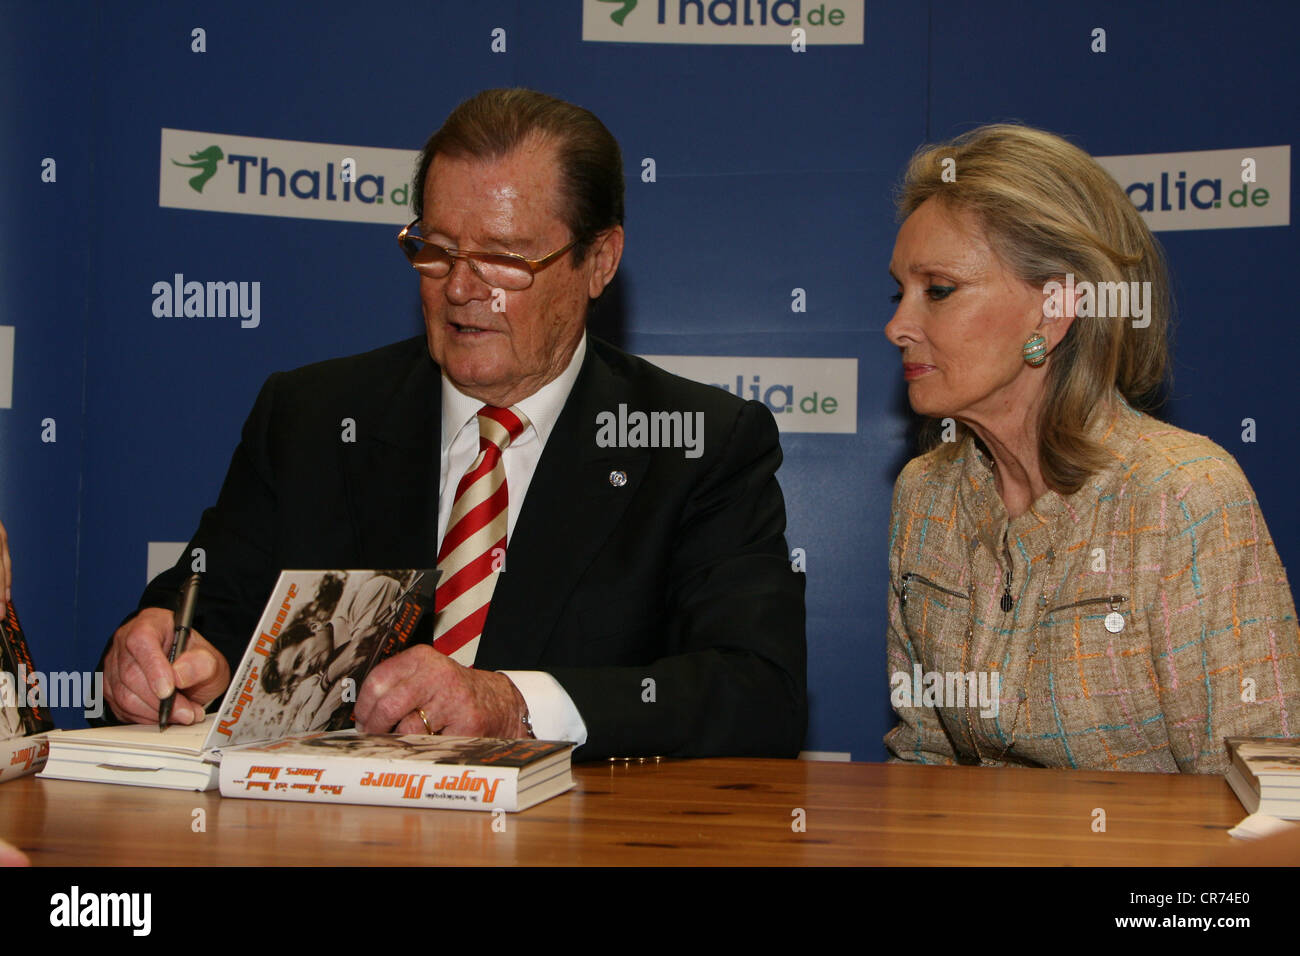 Moore, Roger, * 14.10.1927, British actor, half length, with his wife Kiki Tholstrup, during autographing session to his book 'Mein Name ist Bond.. James Bond', Thalia, Hamburg, Germany, 2009, Stock Photo